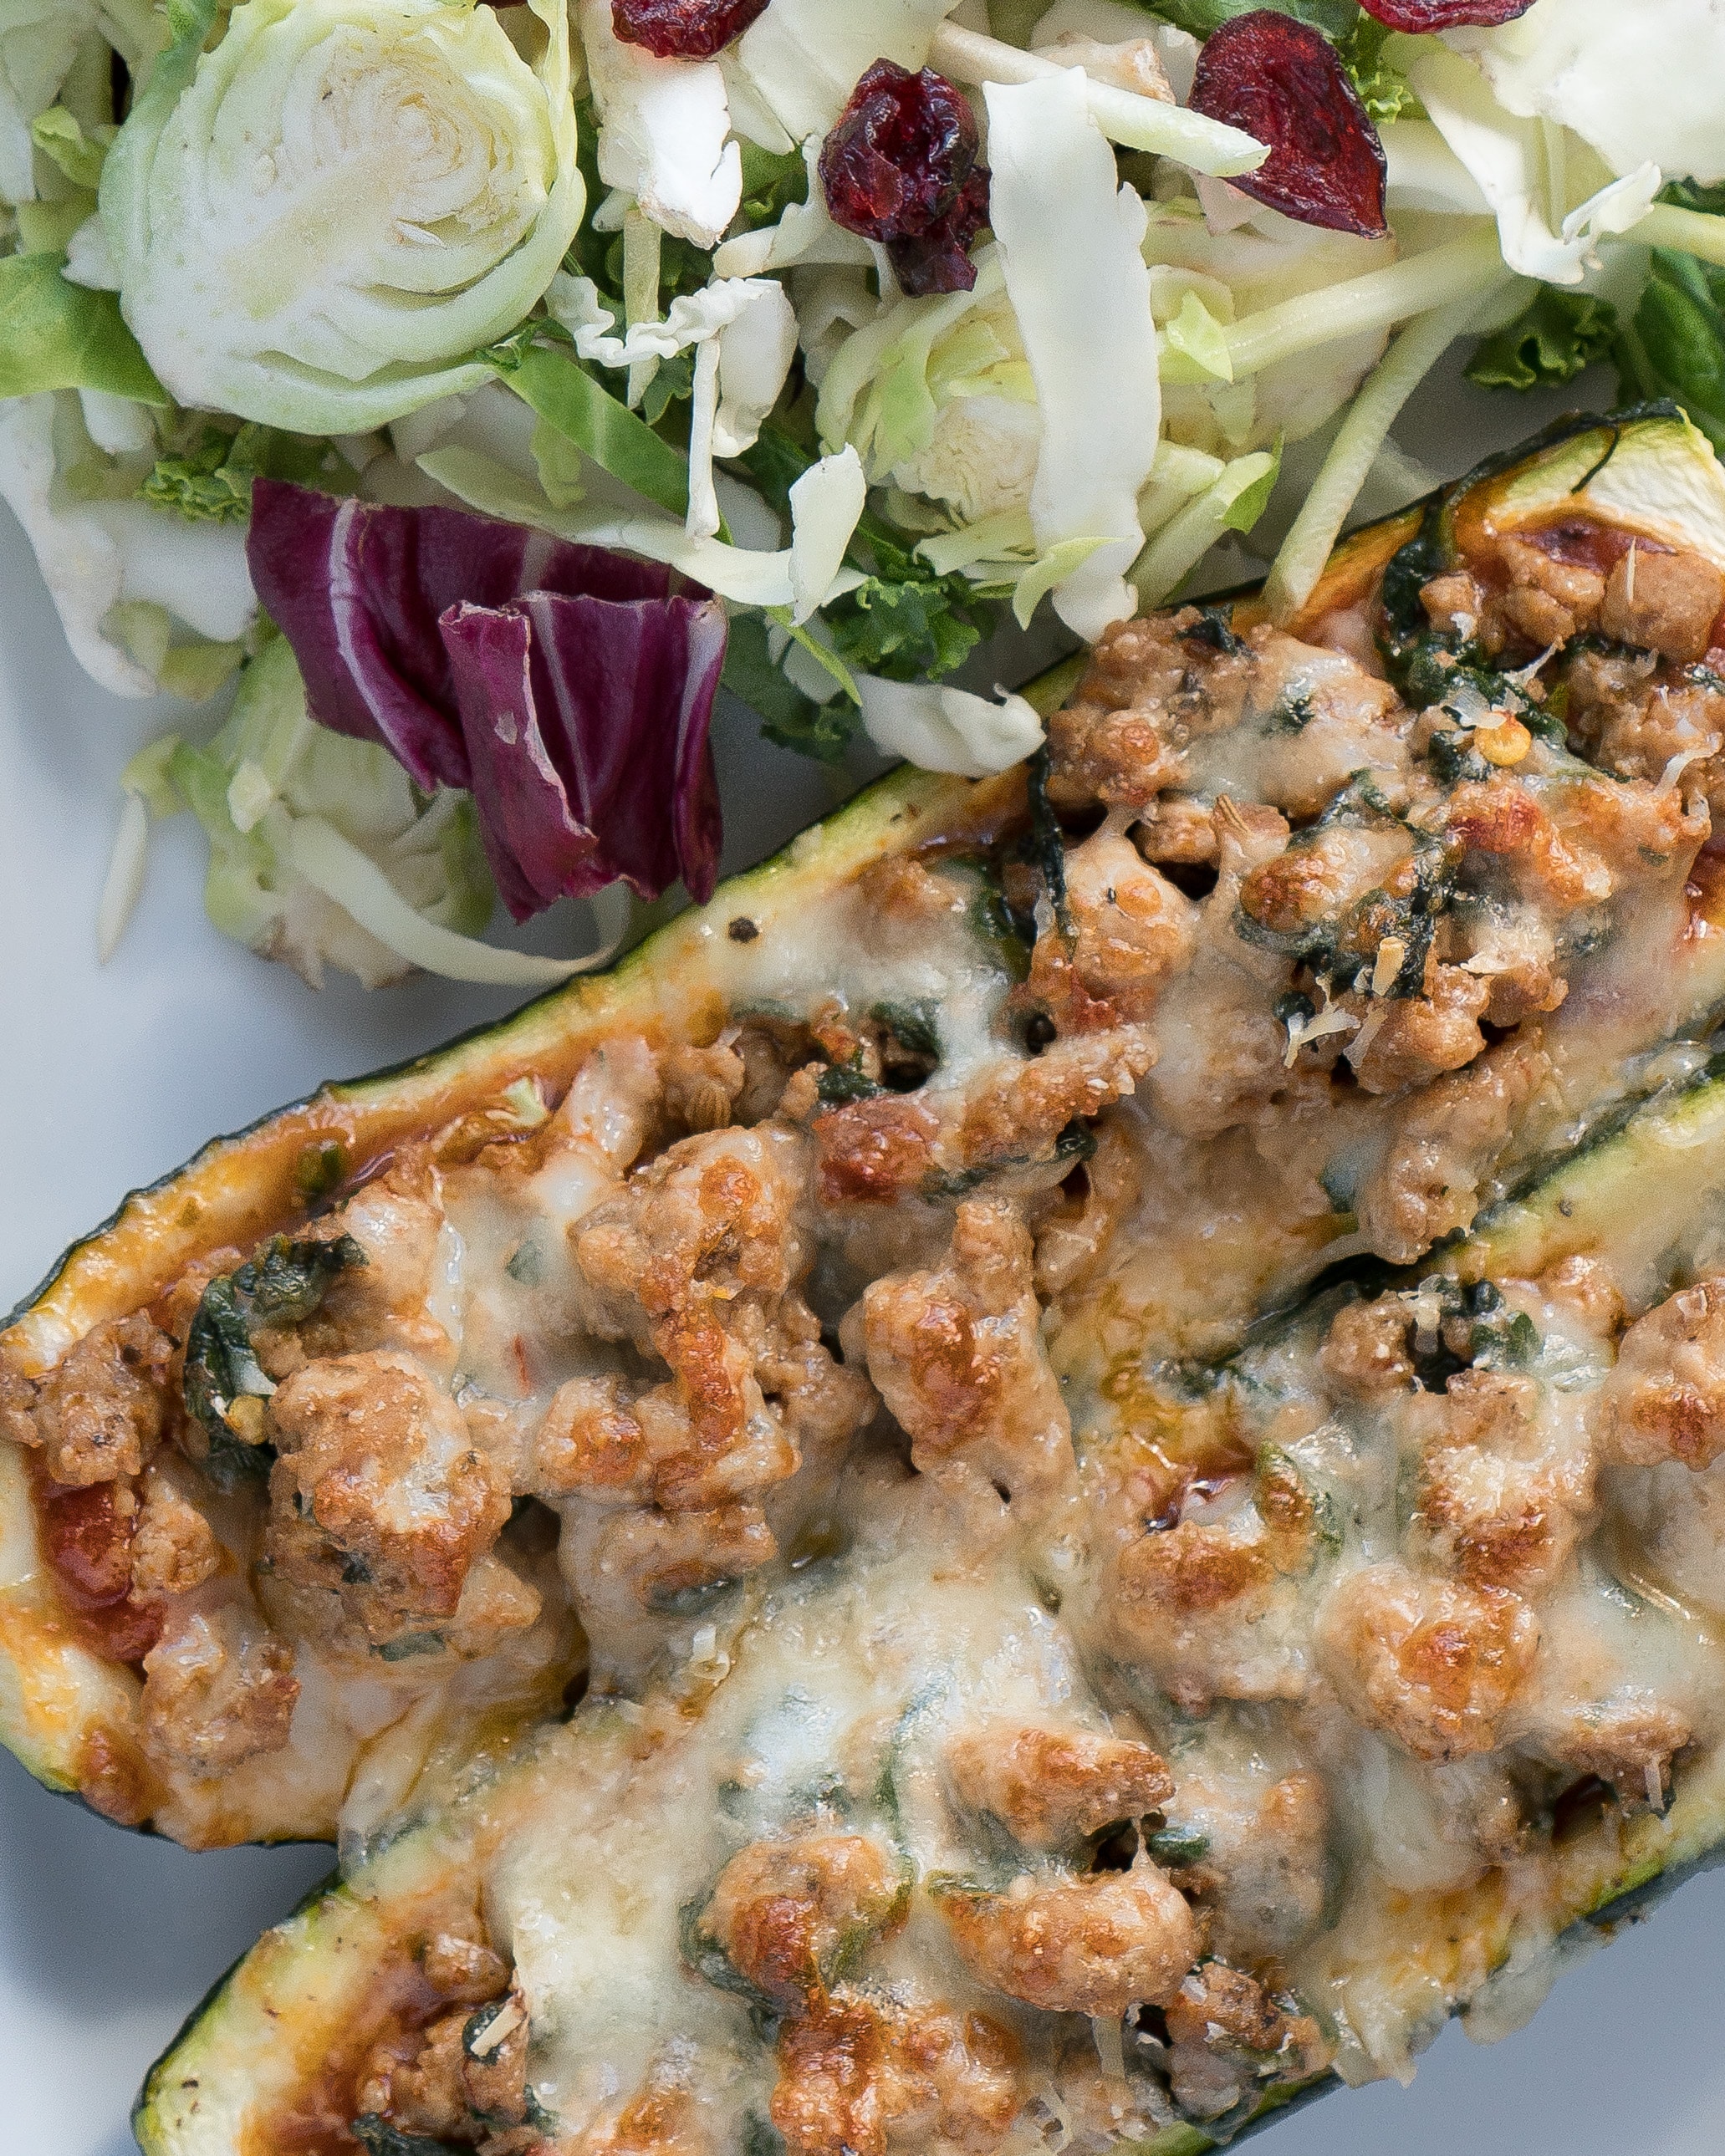 Lasagna Stuffed Zucchini Boats – Healthy, gluten-free recipe for Lasagna Stuffed Zucchini Boats! Using zucchini, tomato-basil sauce, chopped spinach, mozzarella cheese, parmesan, and ground turkey flavored to taste like crumbled Italian sausage. Low carb, low fat, & protein-packed ♥ | freeyourfork.com